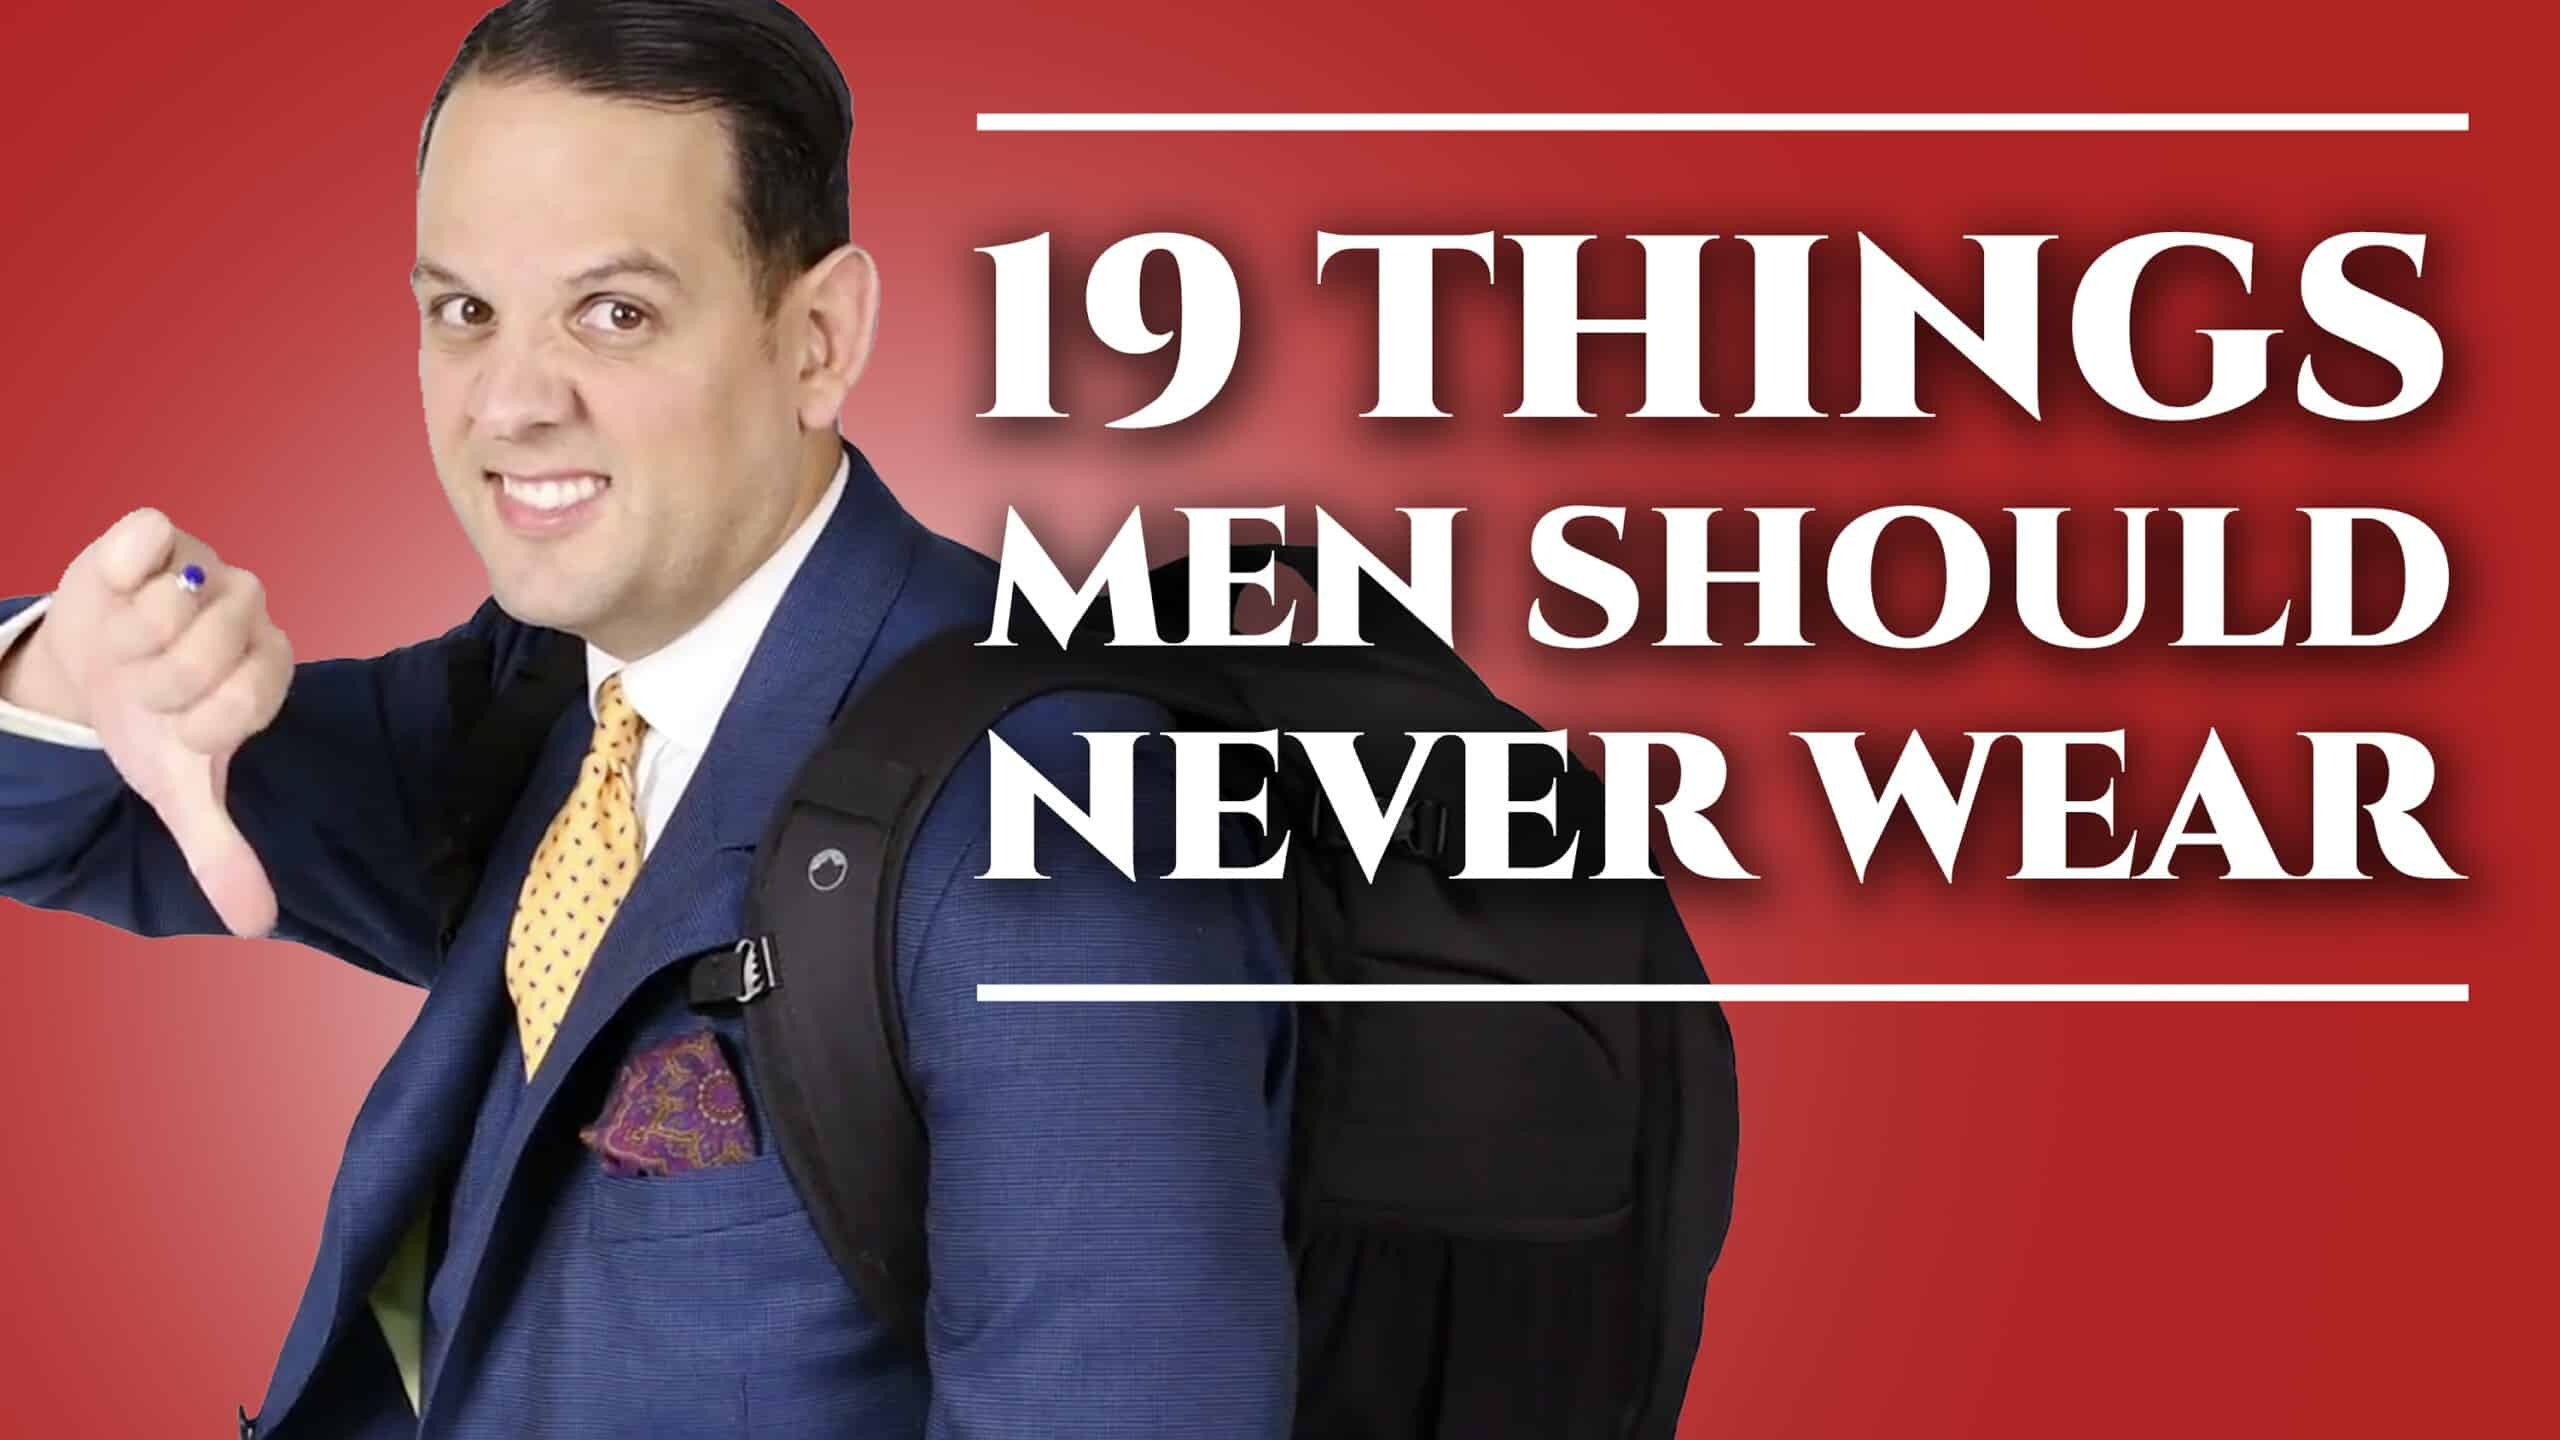 19 things men should never wear 3840x2160 scaled